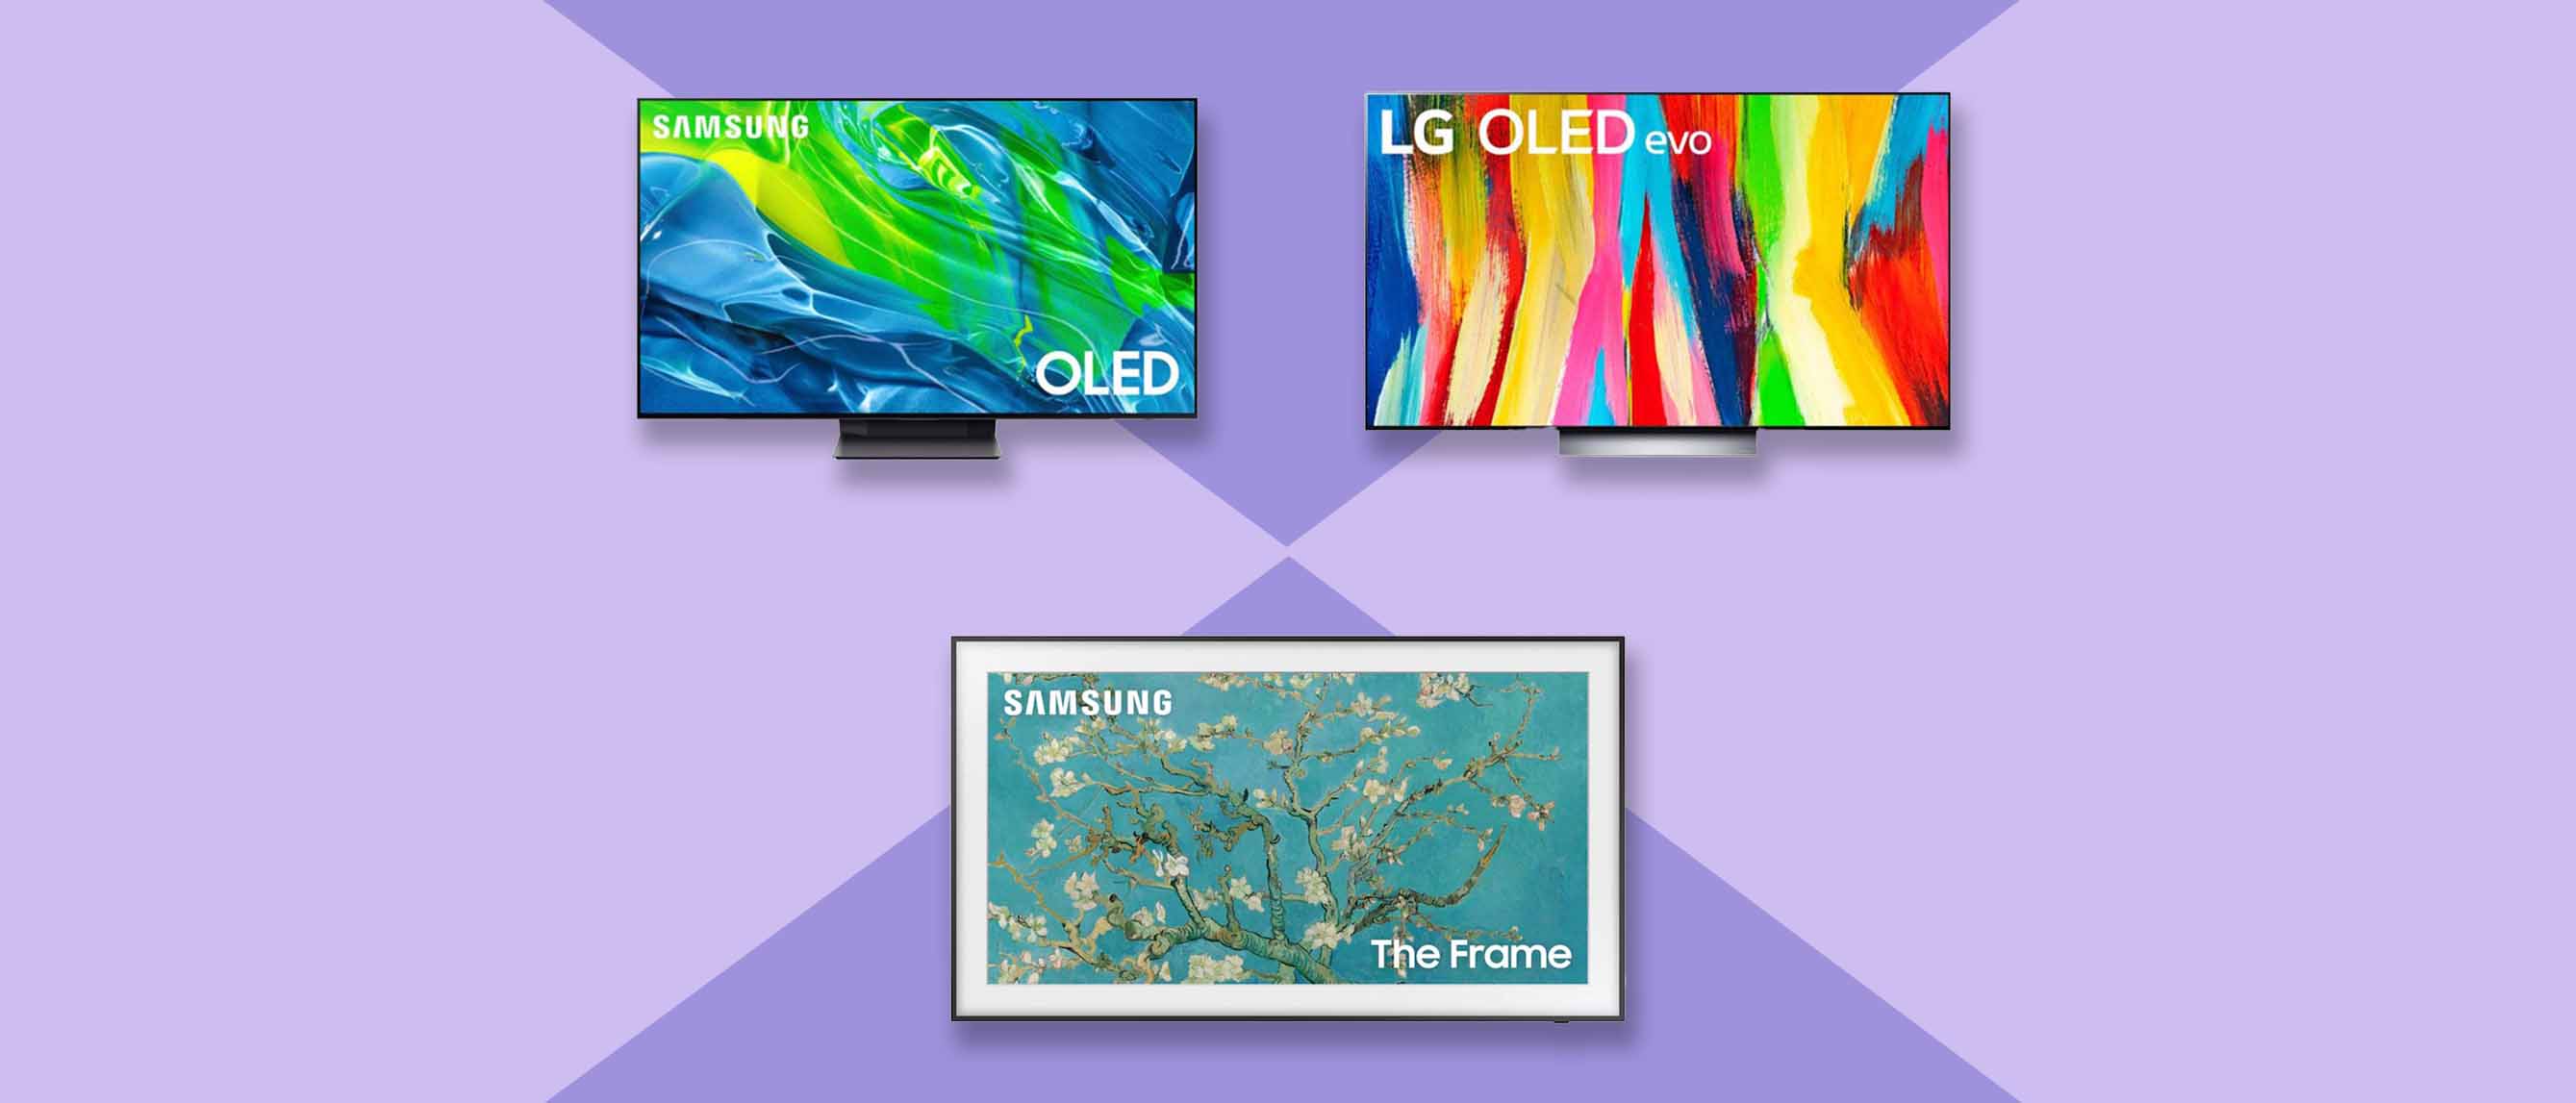 three 55-inch TVs from Samsung and LG